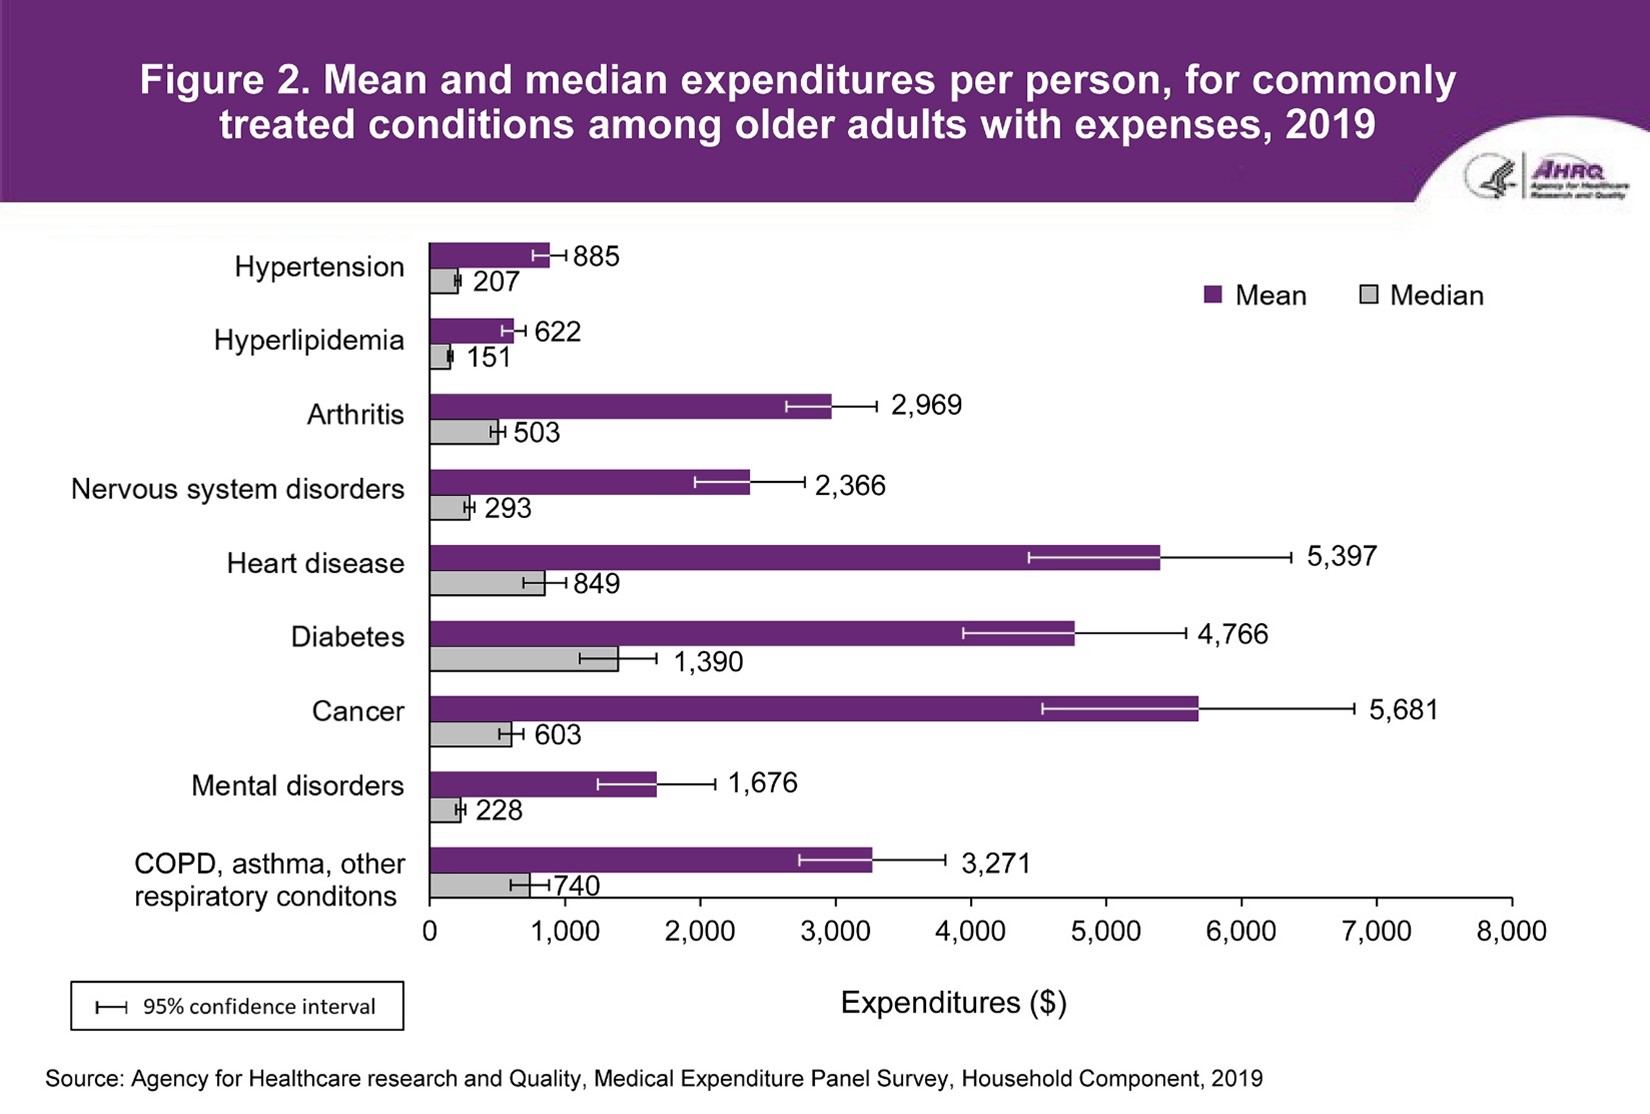 Figure displays: Mean and median expenditures per person for commonly treated conditions among older adults with expenses, 2019